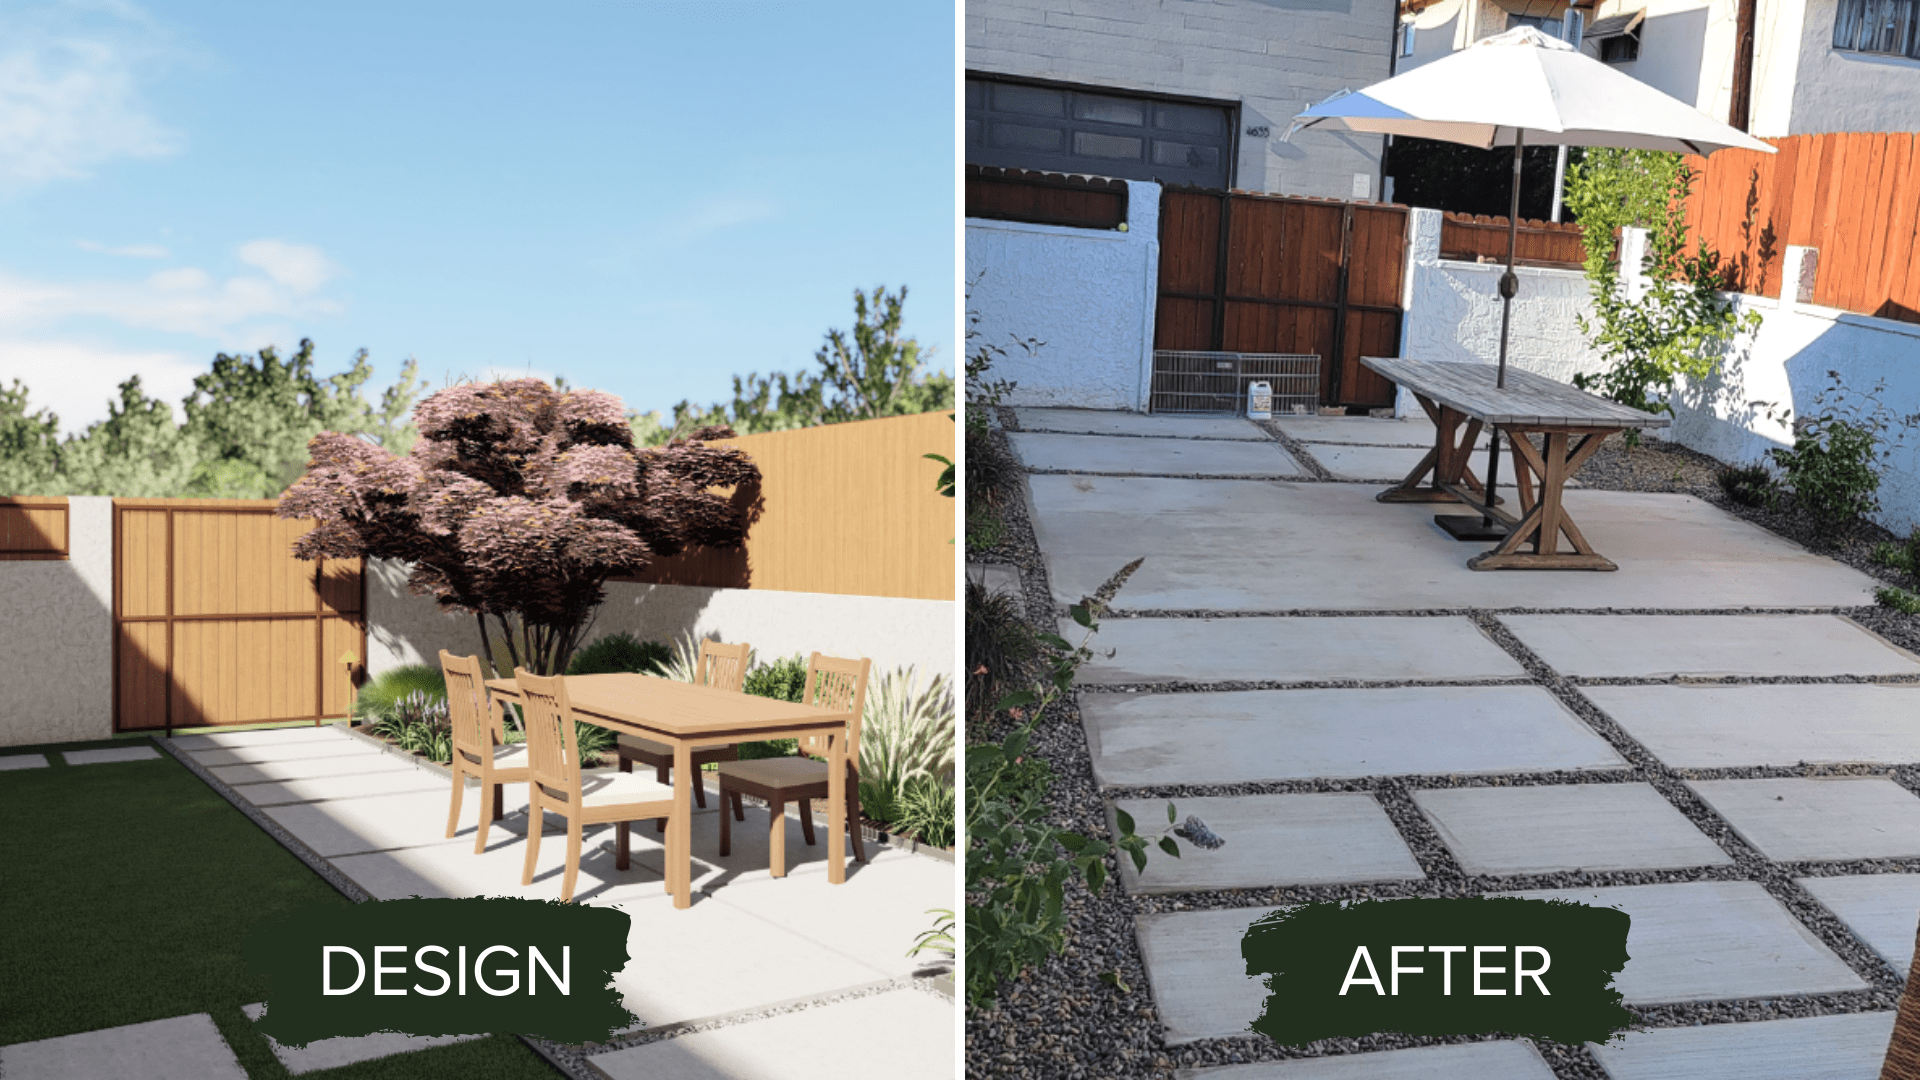 BEFORE AND AFTER BACKYARD DESIGN